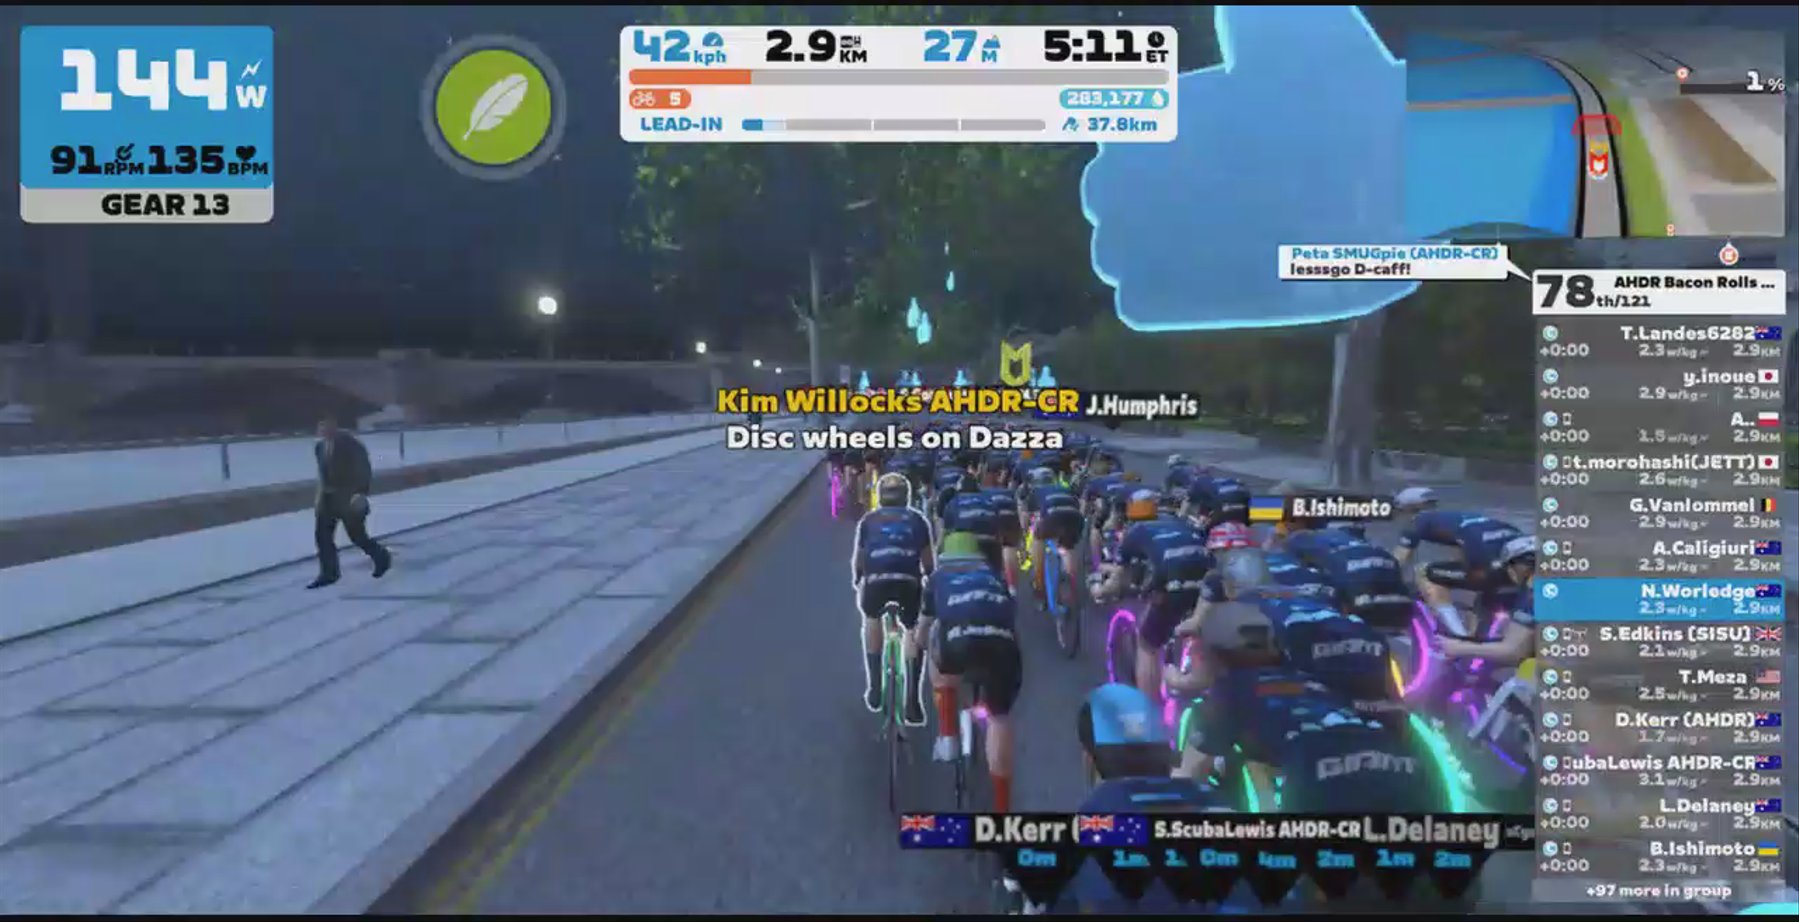 Zwift - Group Ride: AHDR Bacon Rolls with Caffeine (C) on Greater London Flat in London